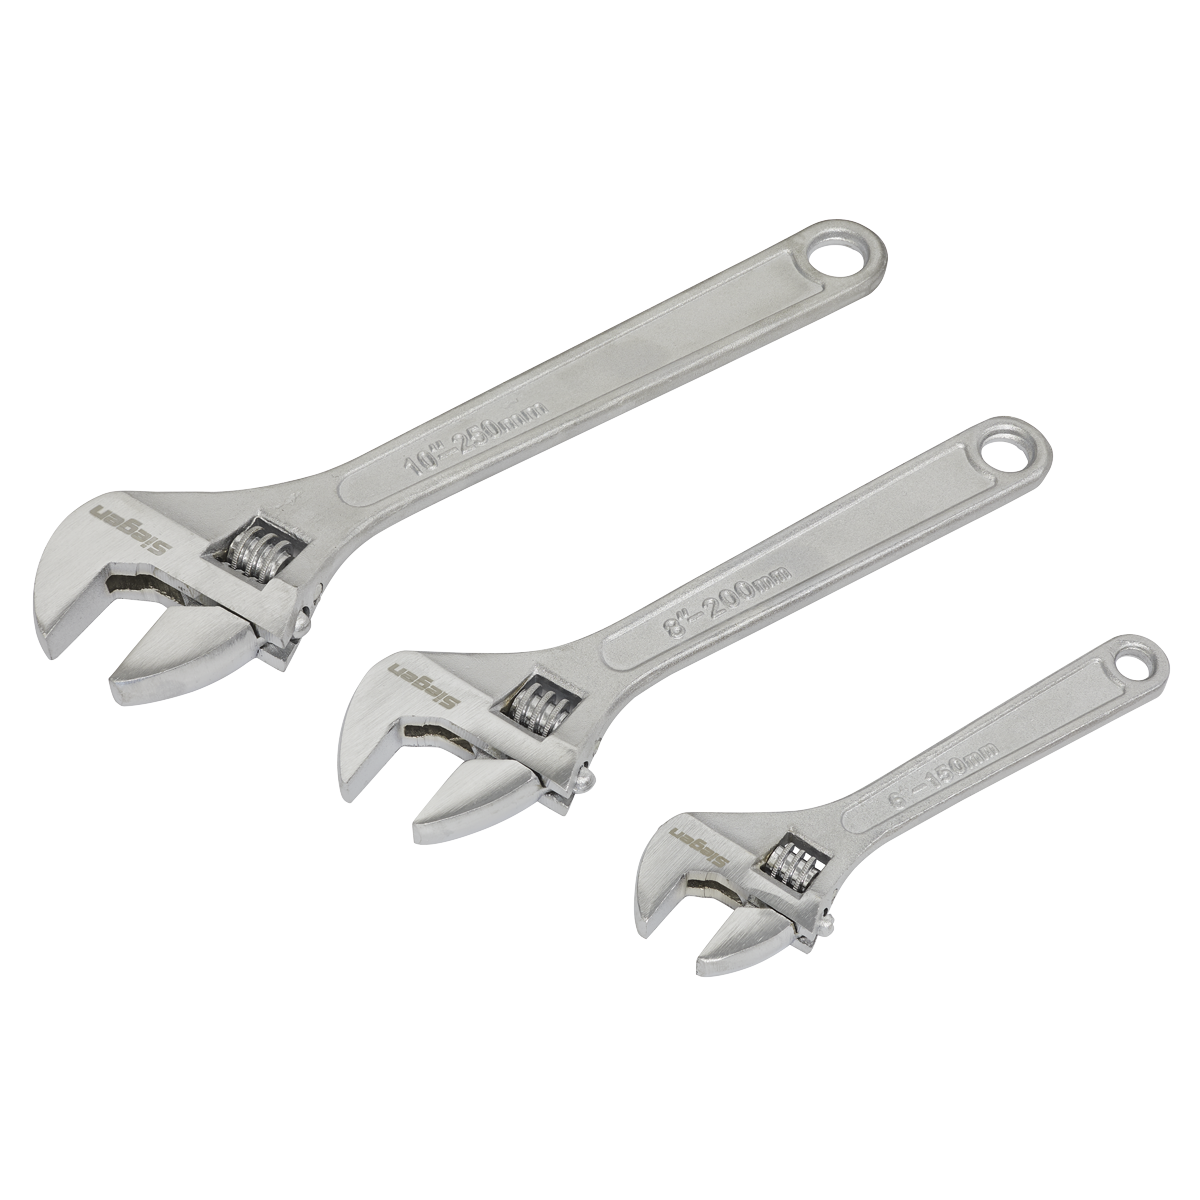 Sealey Adjustable Wrench Set 3pc 150, 200 & 250mm